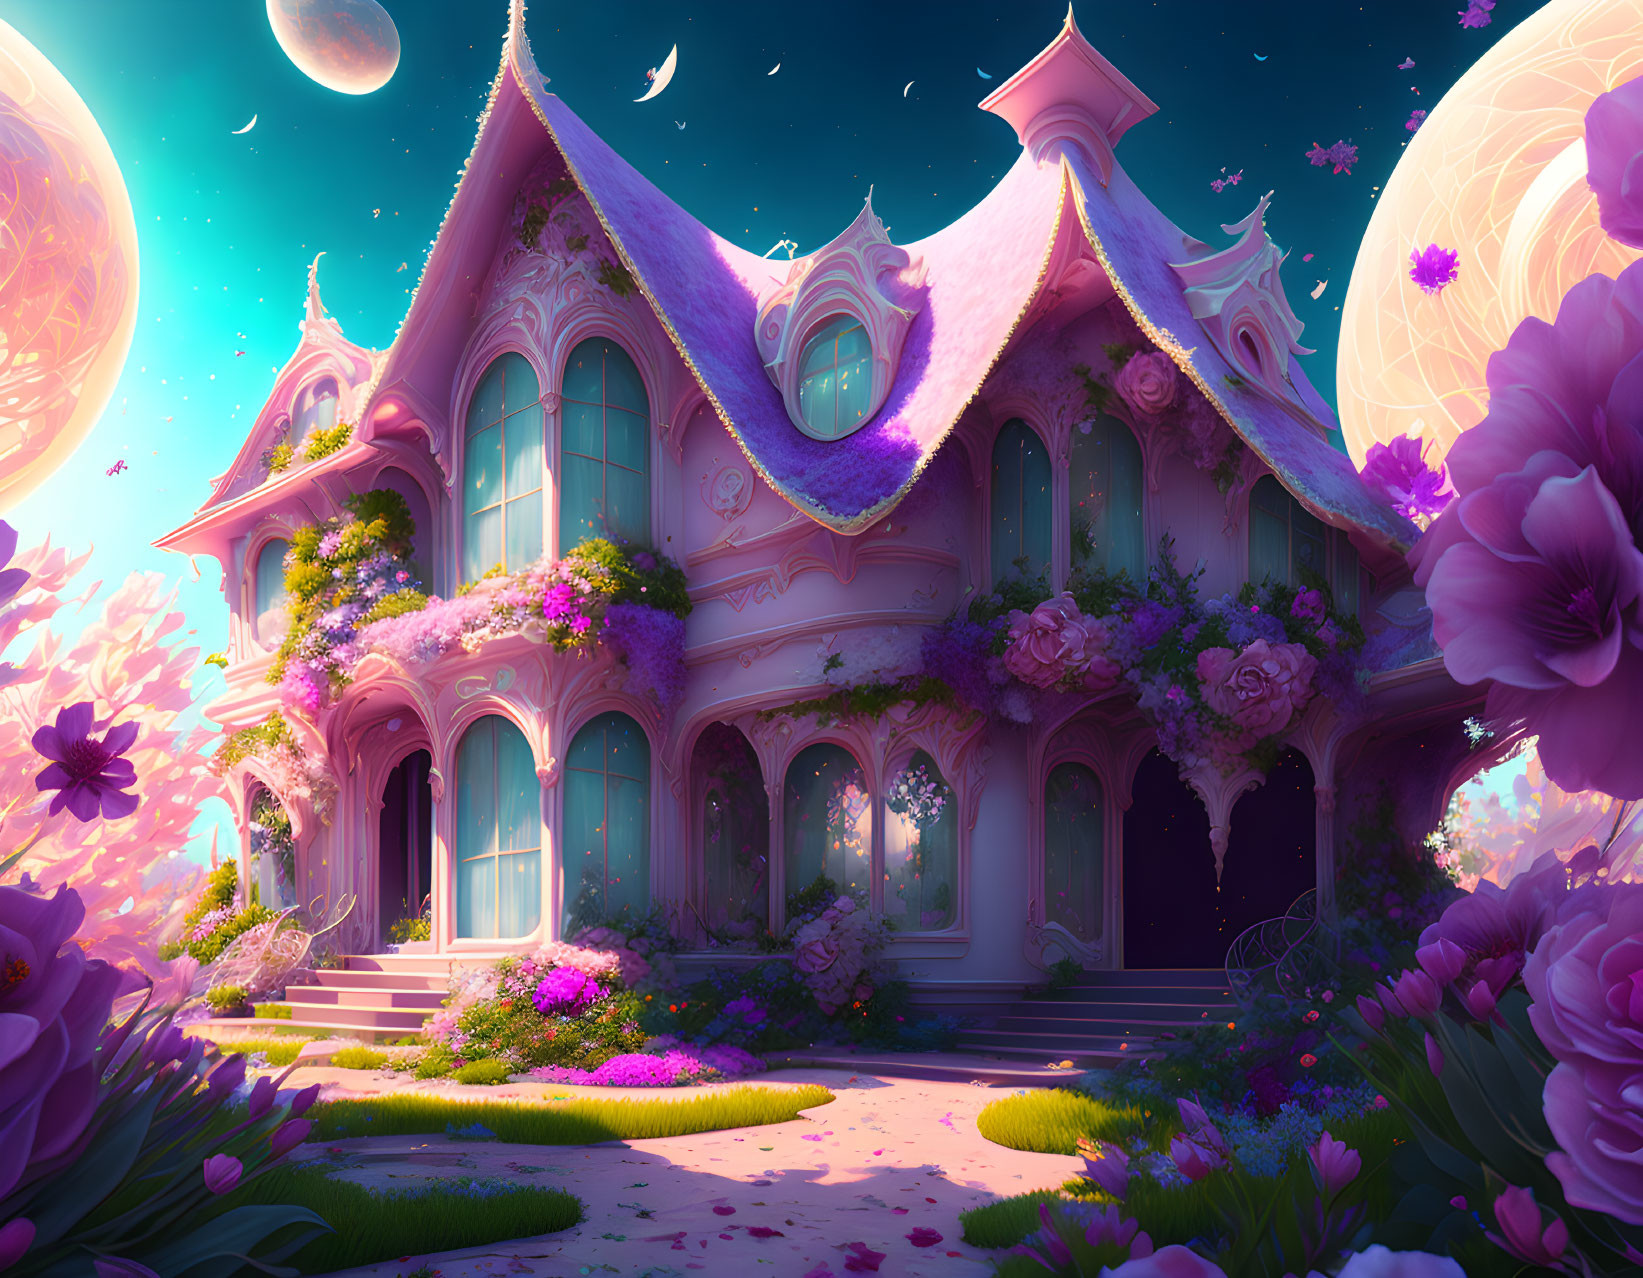 Pink Victorian-style house with purple flowers in magical garden under sky with distant planets.